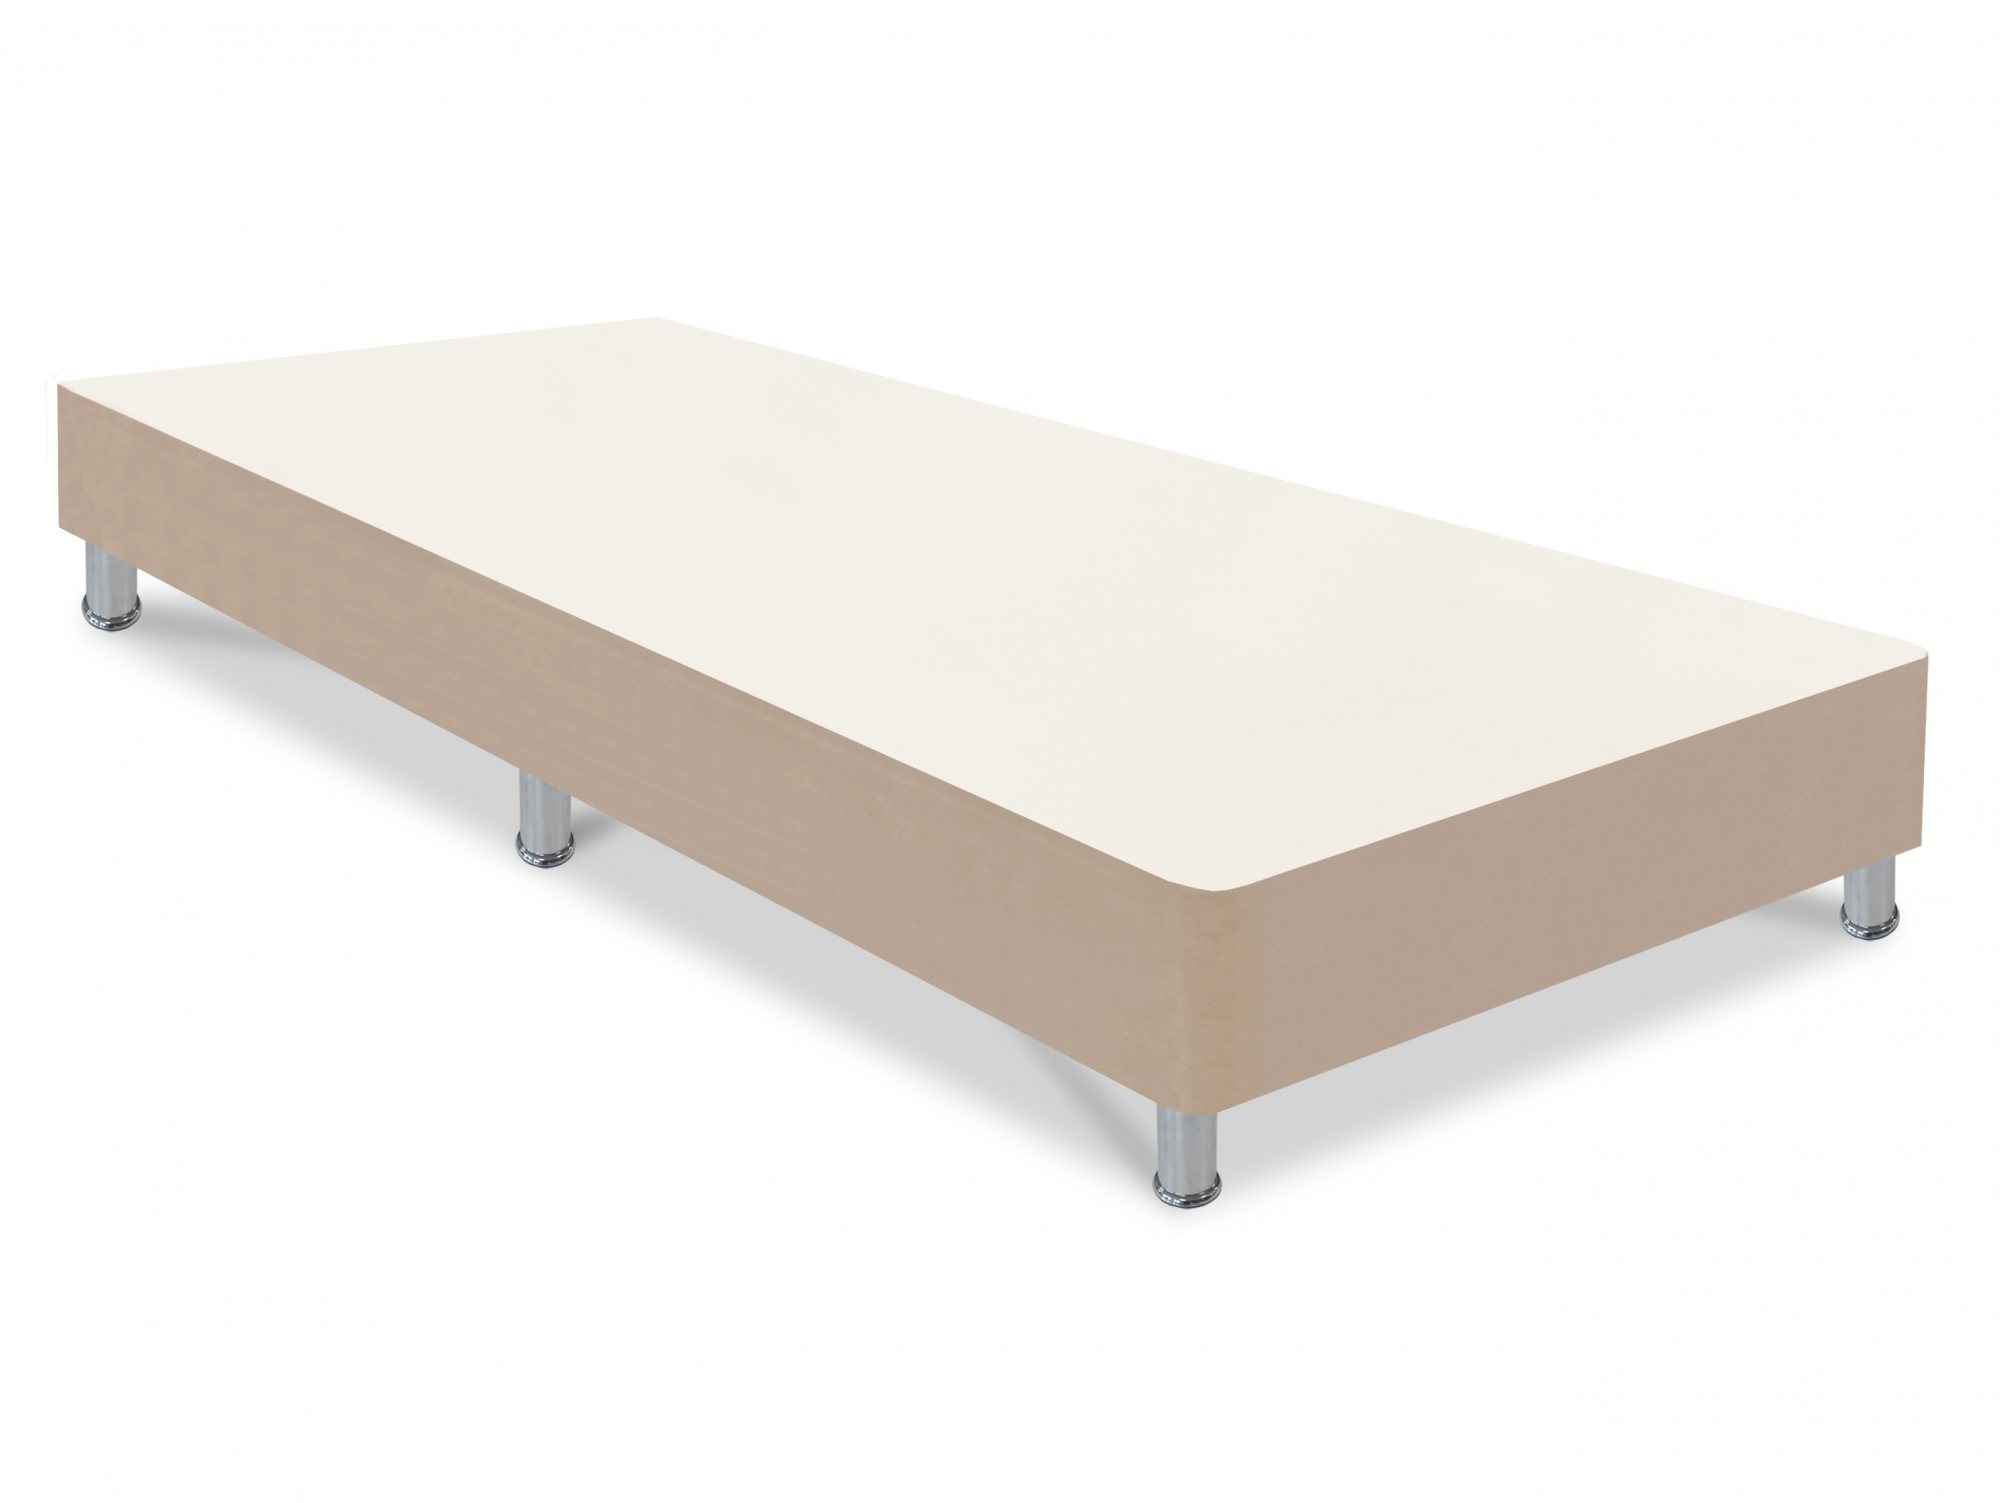 Highgrove Highgrove Faux Suede 2ft6 Small Single Low Divan Base